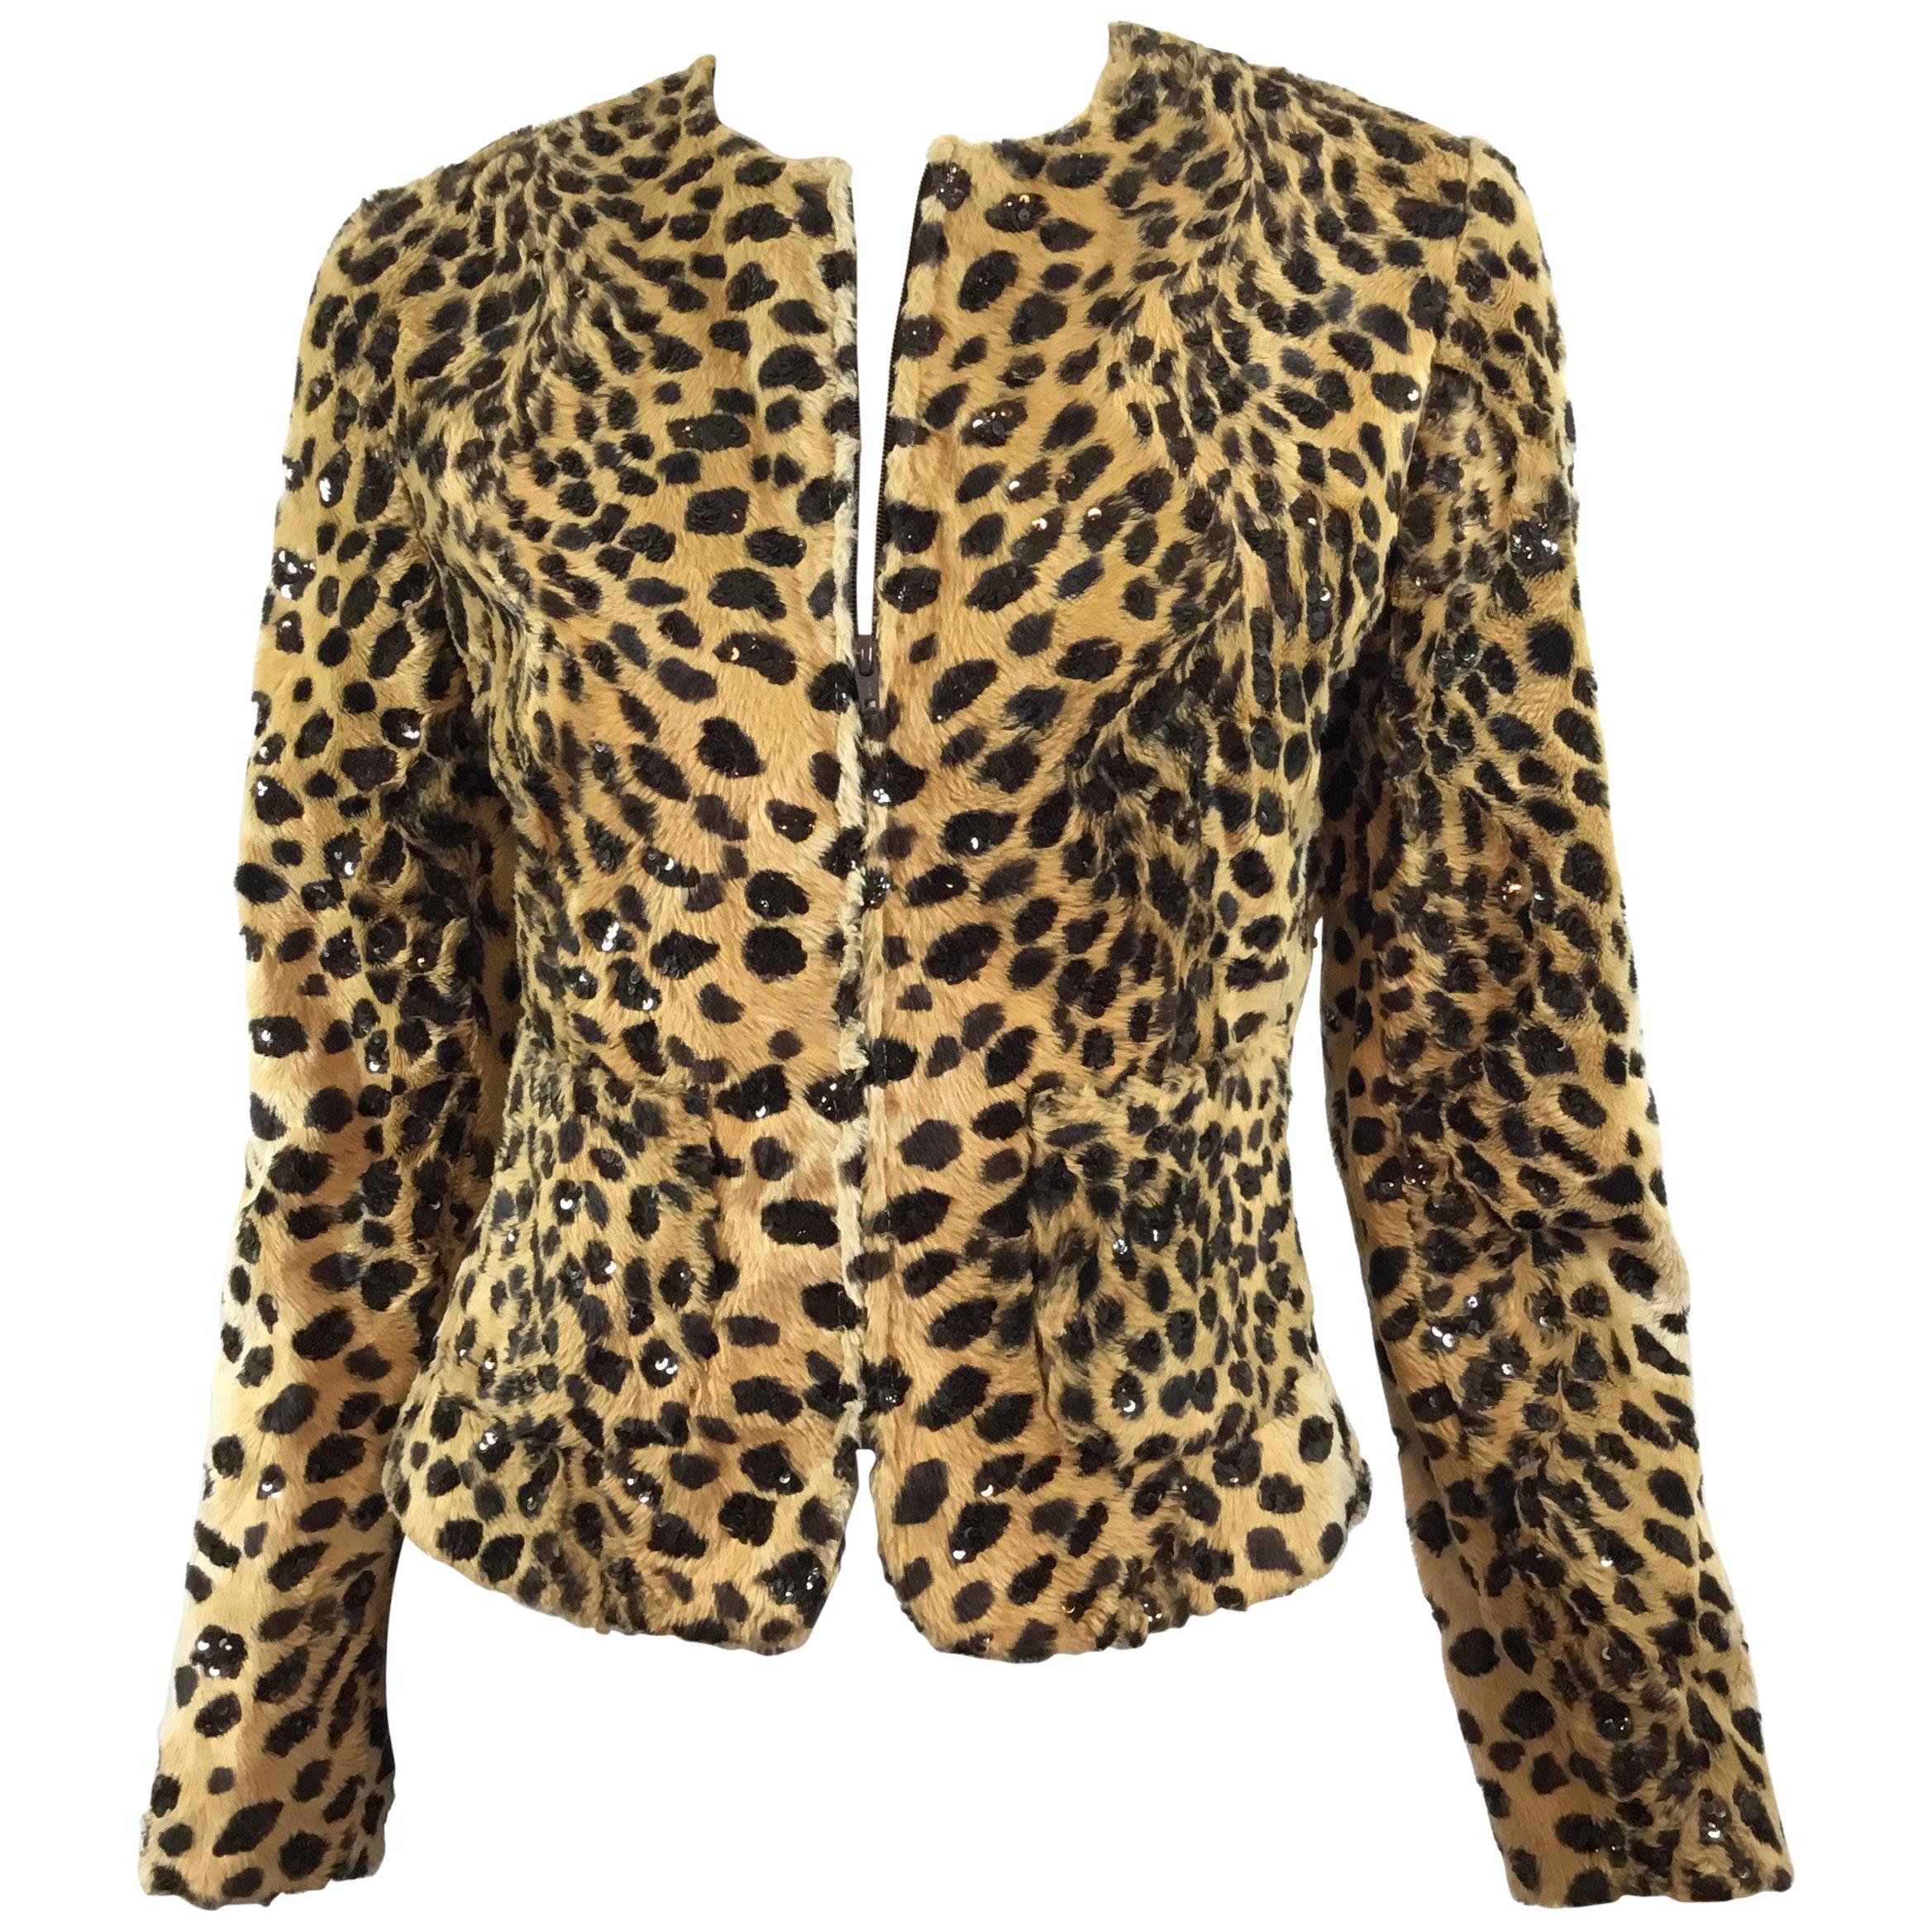 Valentino Leopard Print Jacket with Sequins